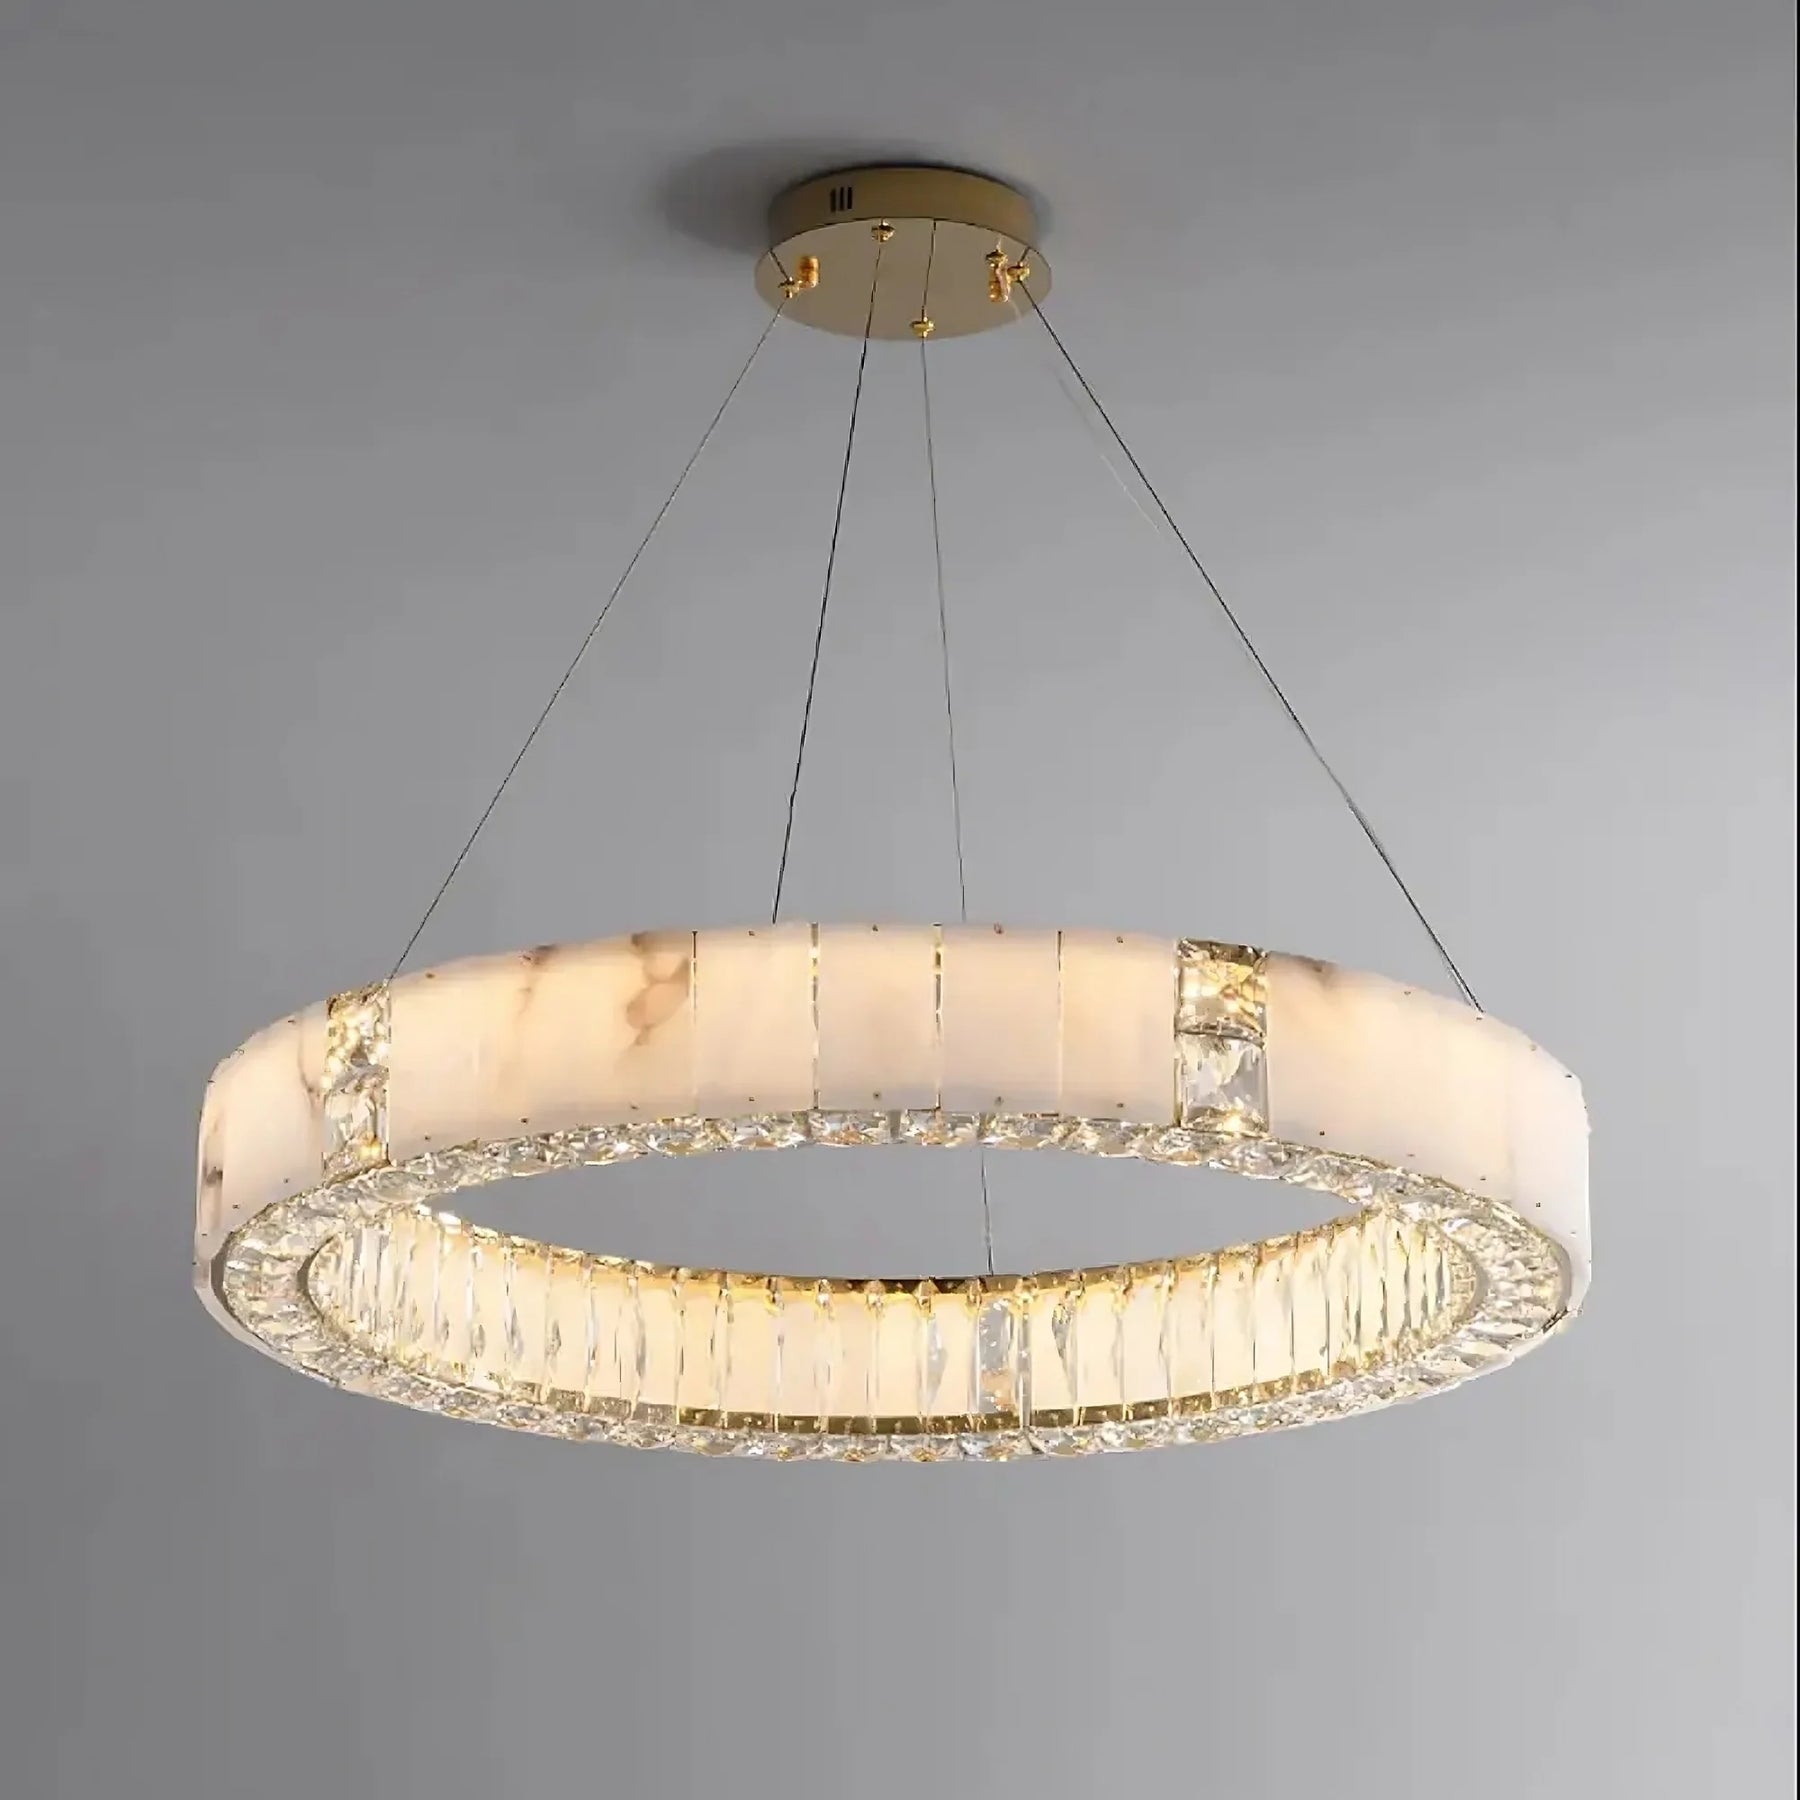 A Morsale.com Natural Marble & Crystal Modern Ceiling Light Fixture with a gold-toned frame, suspended by thin wires. This luxury home décor piece features a band of translucent, natural marble-like material and is adorned with crystals around the inner and outer edges, casting an elegant light.